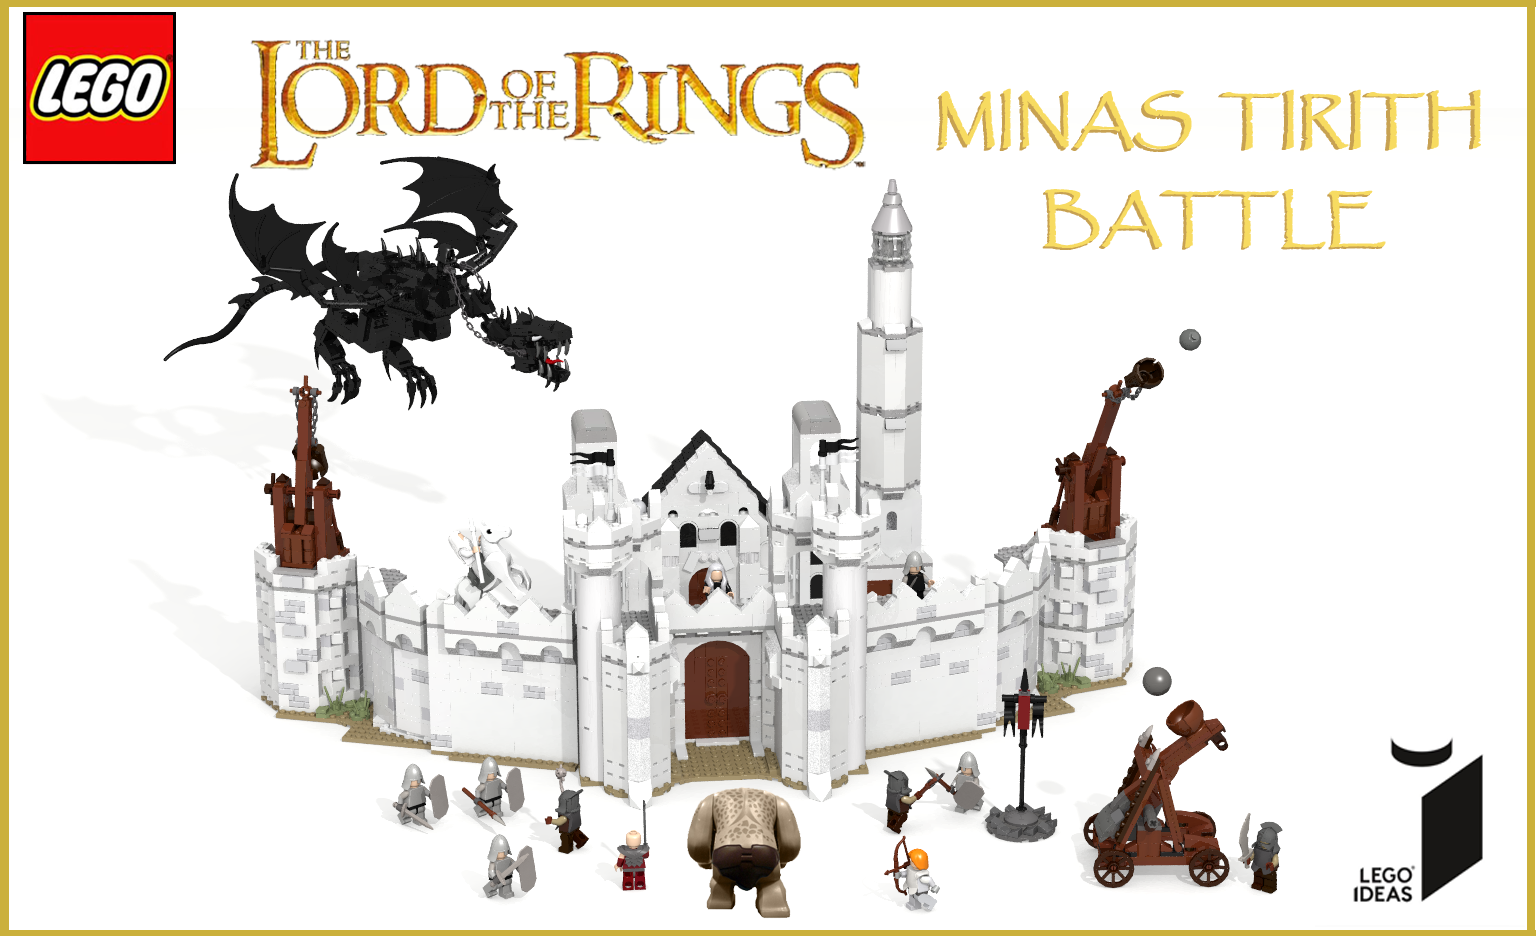 LEGO IDEAS - The Lord Of The Rings - Minas Tirith